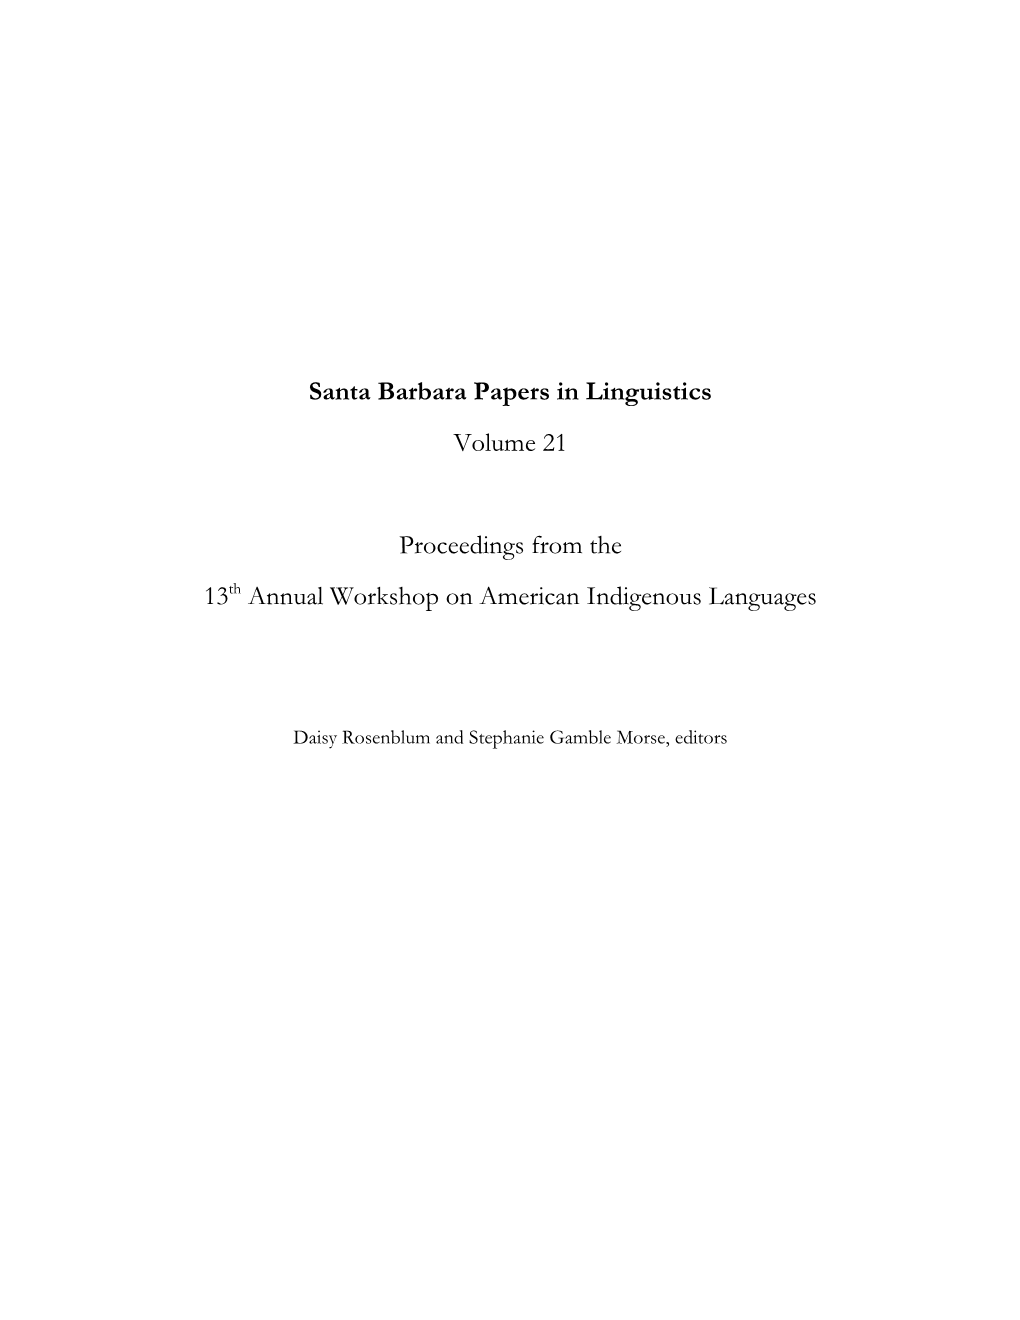 Santa Barbara Papers in Linguistics Volume 21 Proceedings from the 13Th Annual Workshop on American Indigenous Languages